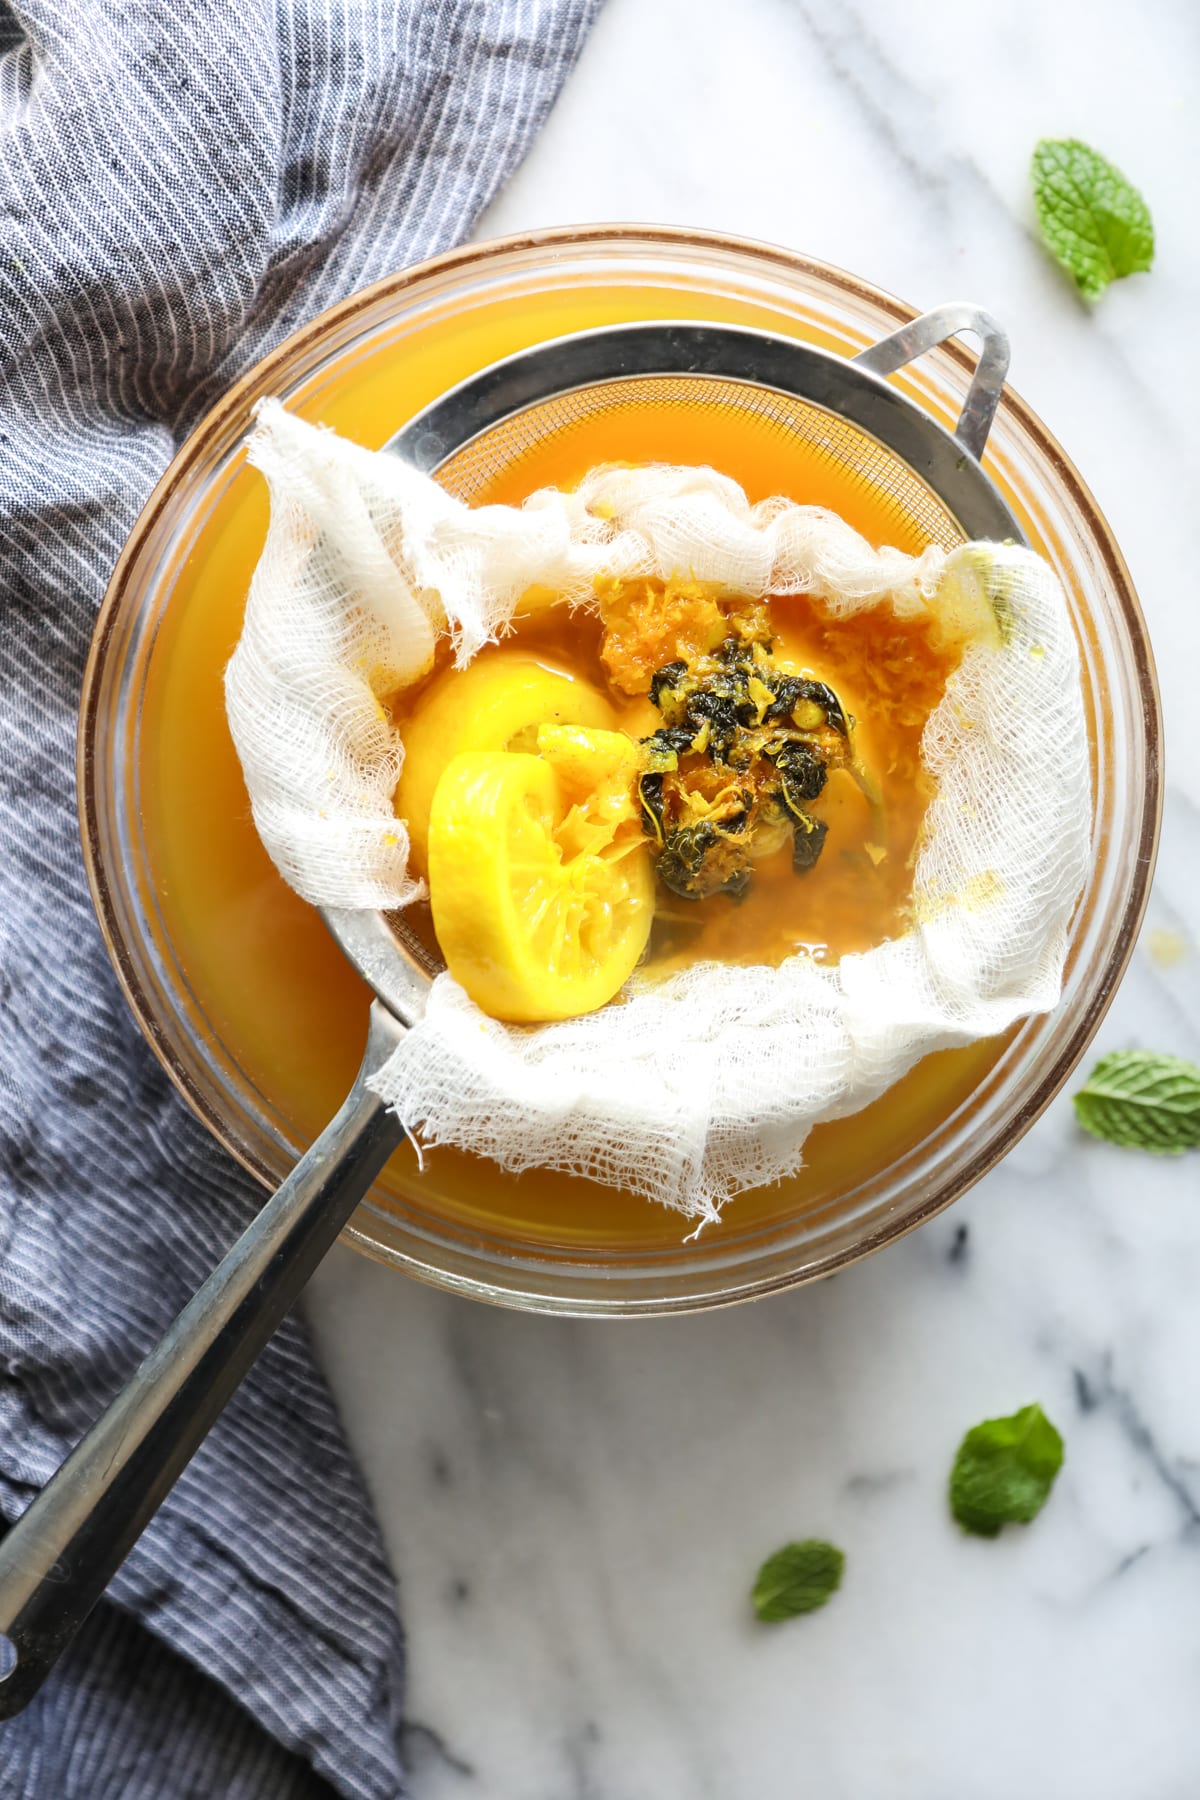 A caffeine-free tea made with turmeric, lemon, mint, honey, and ginger. Turmeric is a natural anti-inflammatory, that's also rich in antioxidants.